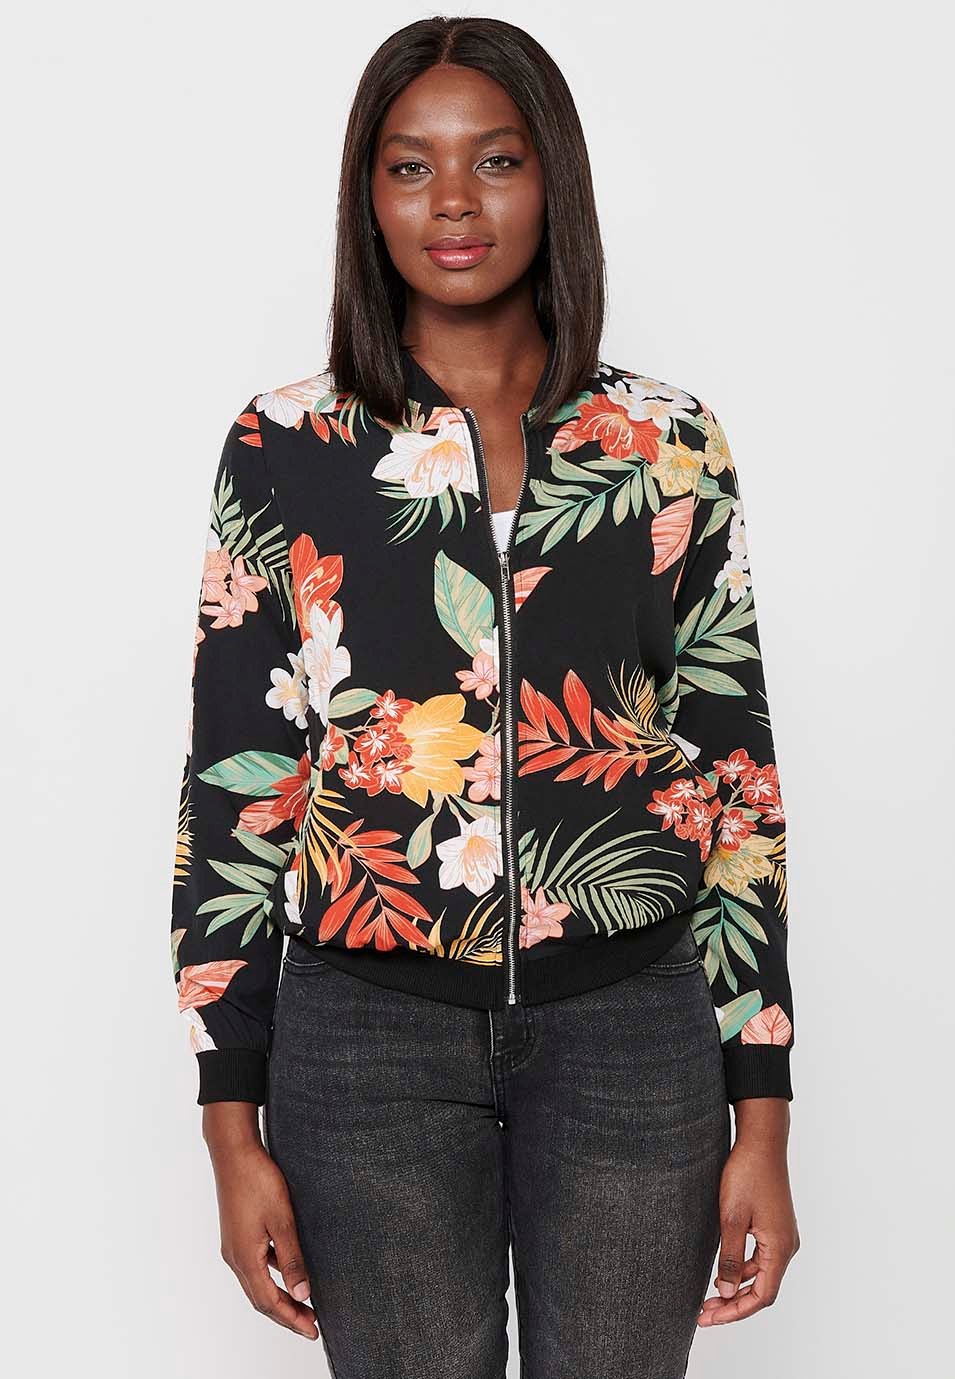 Long-sleeved sweatshirt jacket with ribbed finishes and floral print with front zipper closure in Multicolor for Women 1